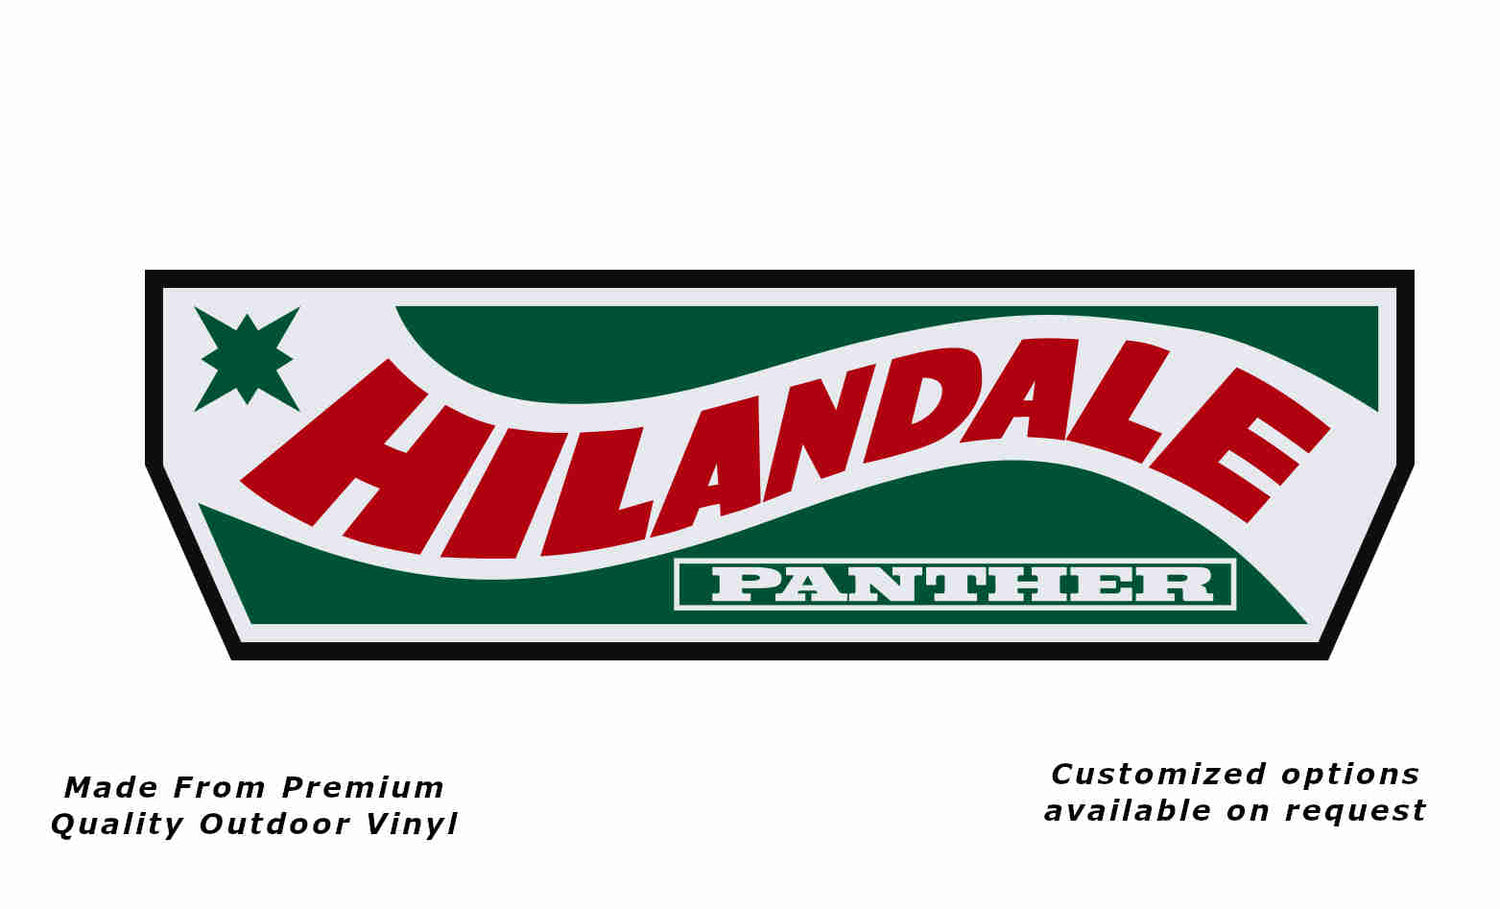 Hilandale caravan replacement vinyl decal in white, green, red and black.